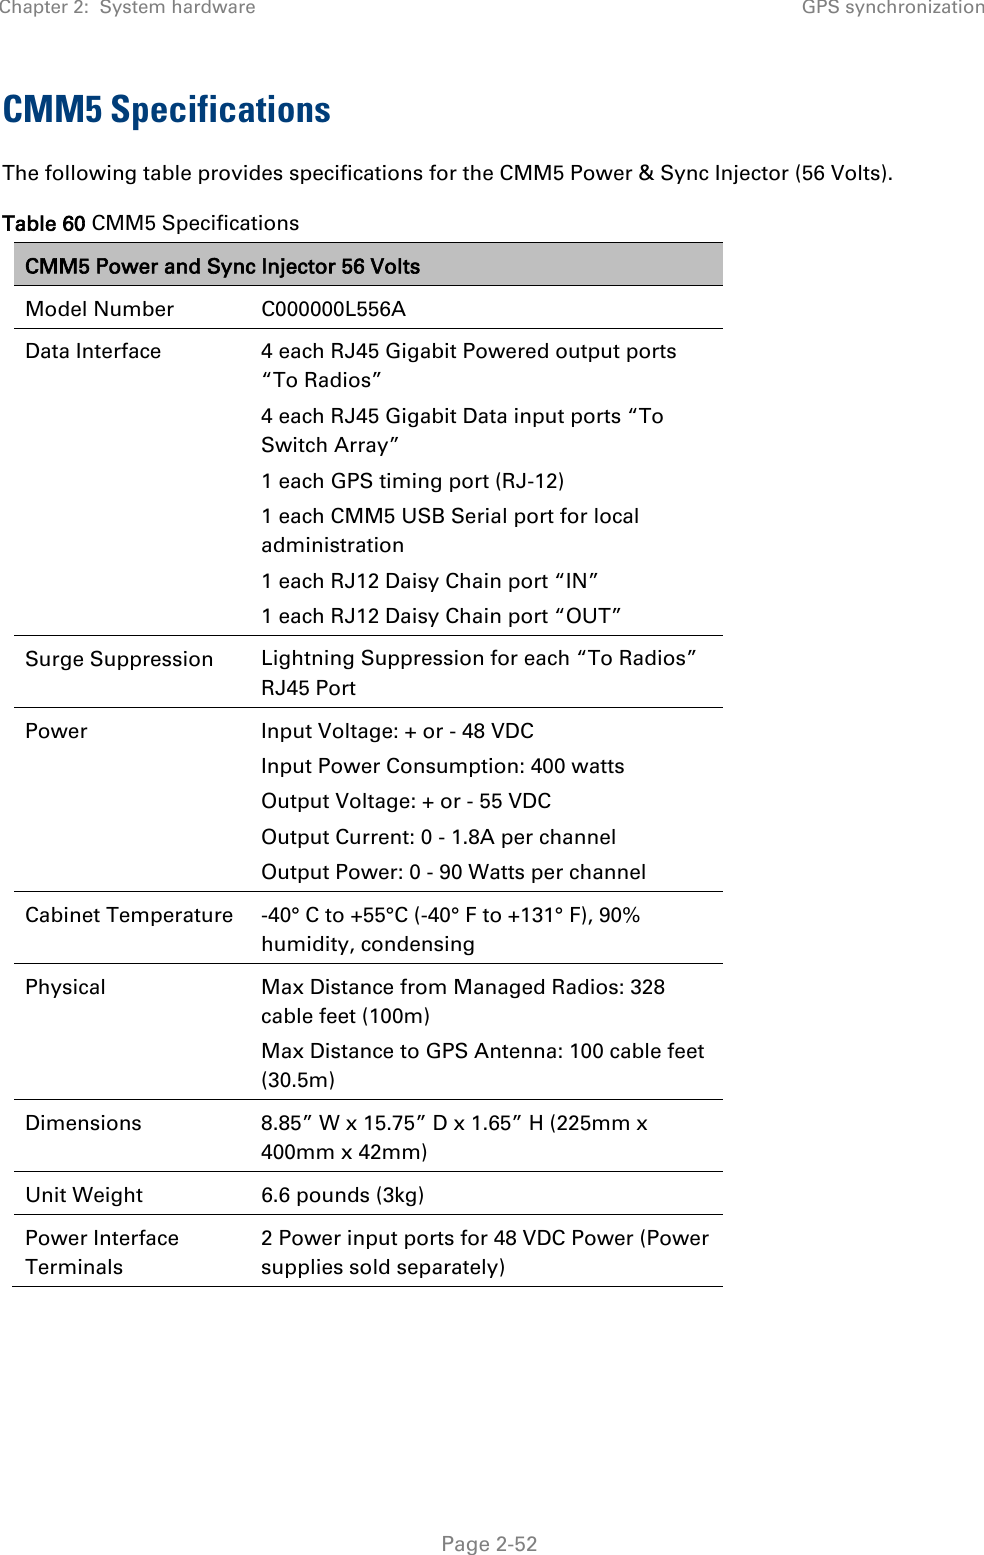 Chapter 2:  System hardware GPS synchronization   Page 2-52 CMM5 Specifications The following table provides specifications for the CMM5 Power &amp; Sync Injector (56 Volts). Table 60 CMM5 Specifications CMM5 Power and Sync Injector 56 Volts Model Number C000000L556A Data Interface 4 each RJ45 Gigabit Powered output ports “To Radios” 4 each RJ45 Gigabit Data input ports “To Switch Array” 1 each GPS timing port (RJ-12) 1 each CMM5 USB Serial port for local administration 1 each RJ12 Daisy Chain port “IN” 1 each RJ12 Daisy Chain port “OUT” Surge Suppression  Lightning Suppression for each “To Radios” RJ45 Port Power  Input Voltage: + or - 48 VDC Input Power Consumption: 400 watts Output Voltage: + or - 55 VDC Output Current: 0 - 1.8A per channel Output Power: 0 - 90 Watts per channel Cabinet Temperature -40° C to +55°C (-40° F to +131° F), 90% humidity, condensing Physical  Max Distance from Managed Radios: 328 cable feet (100m) Max Distance to GPS Antenna: 100 cable feet (30.5m) Dimensions 8.85” W x 15.75” D x 1.65” H (225mm x 400mm x 42mm) Unit Weight 6.6 pounds (3kg) Power Interface Terminals 2 Power input ports for 48 VDC Power (Power supplies sold separately)    